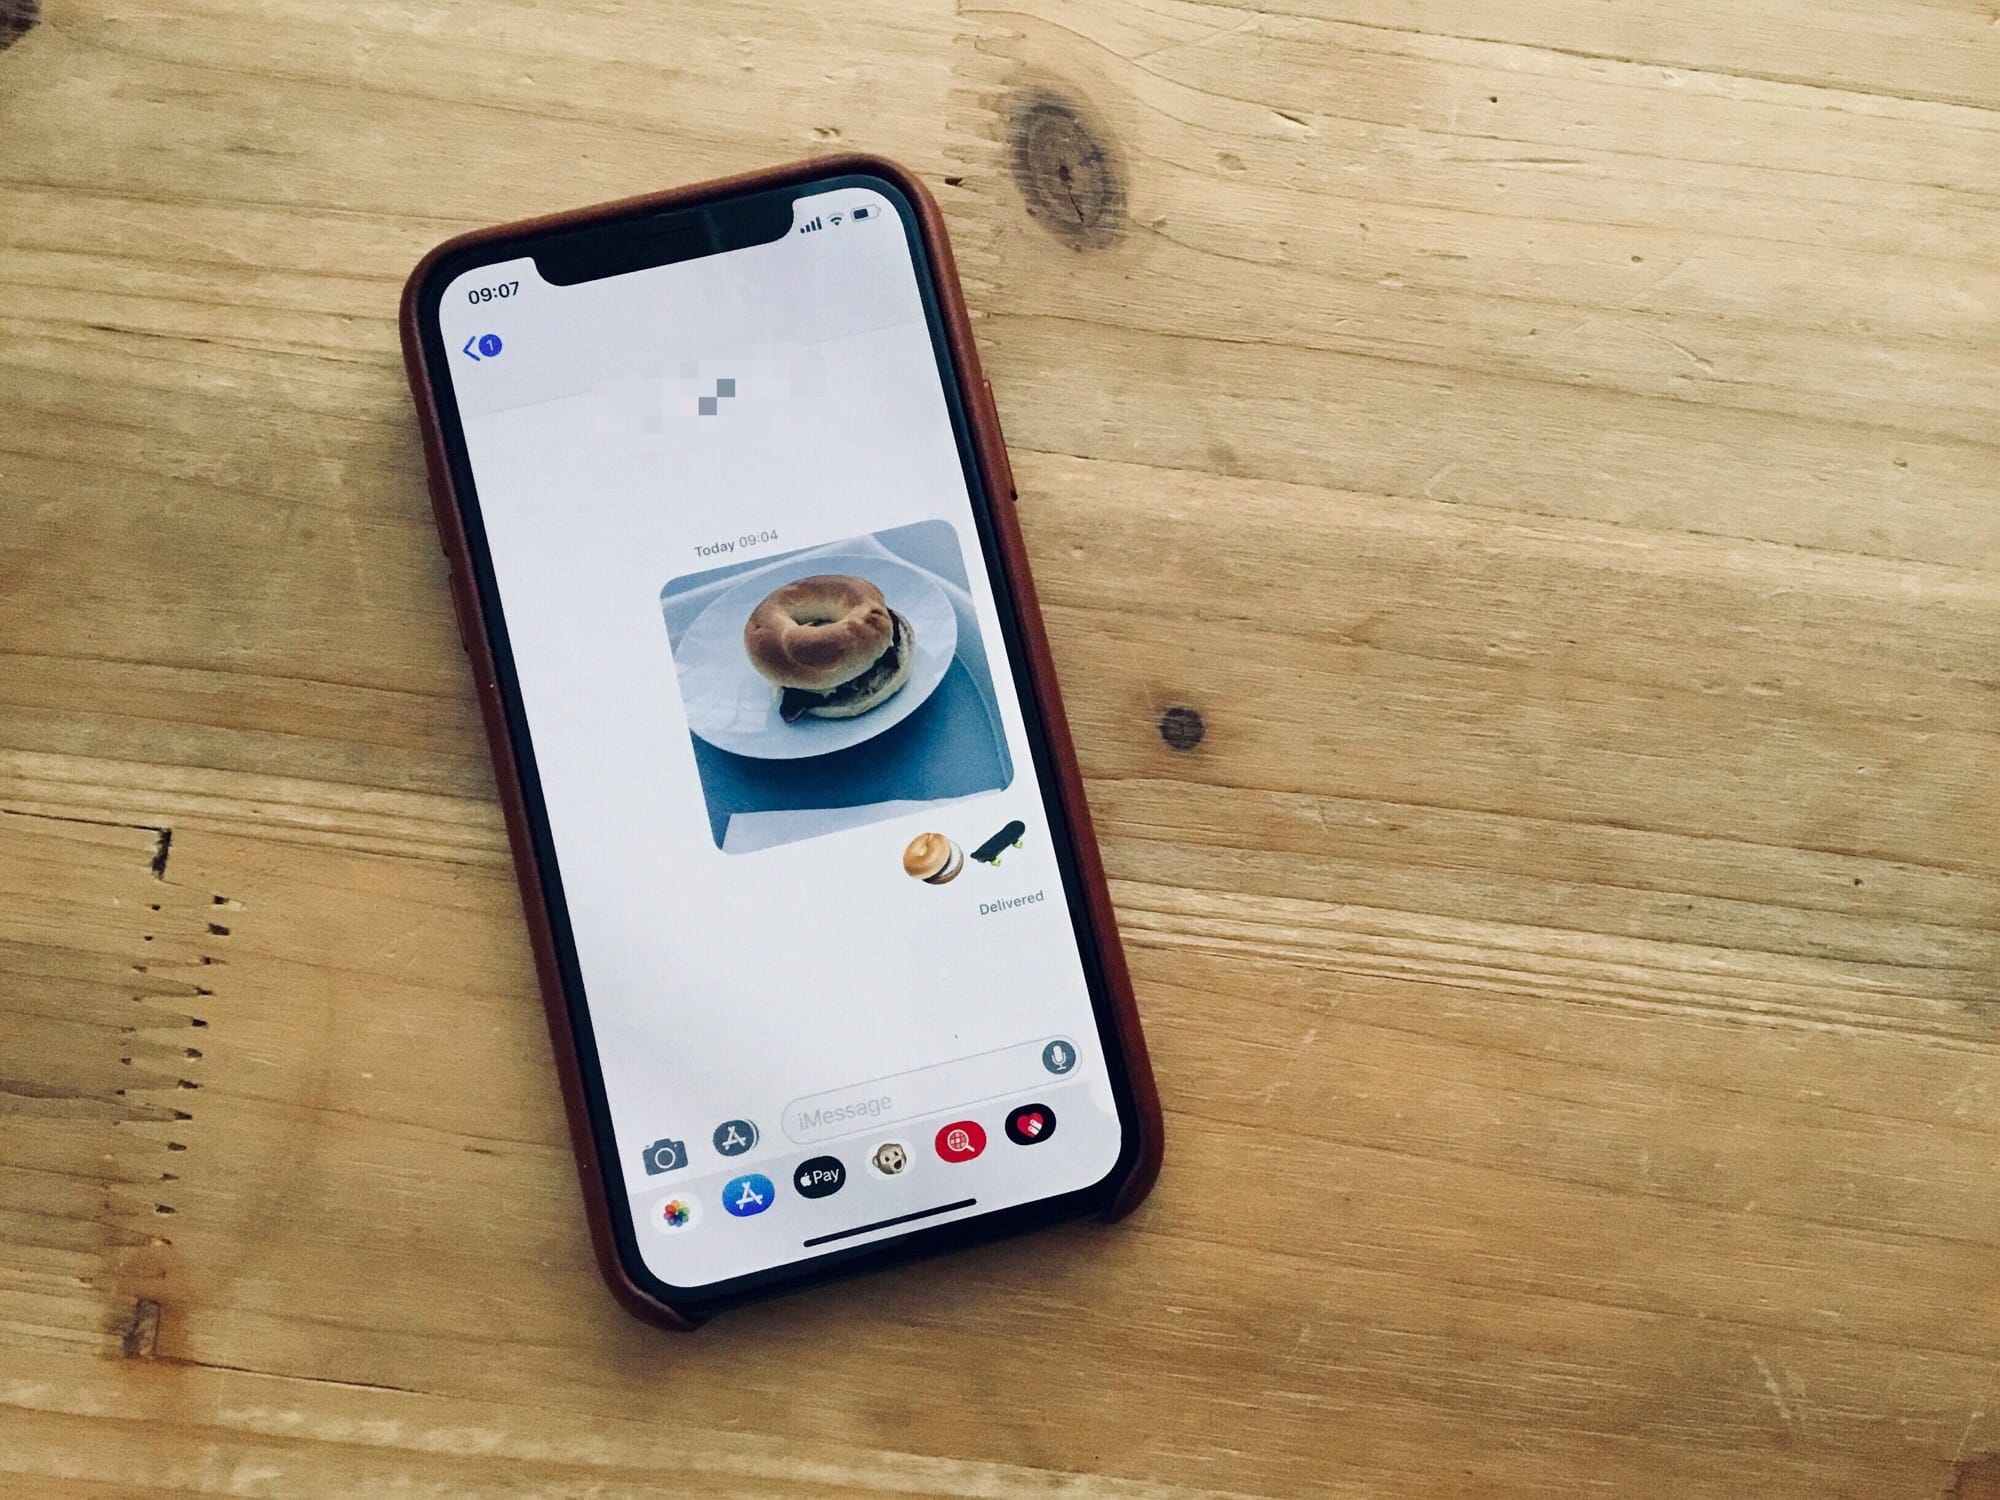 Now that iOS 12.1 has officially added bagel emoji, it’s time to exit the beta program.